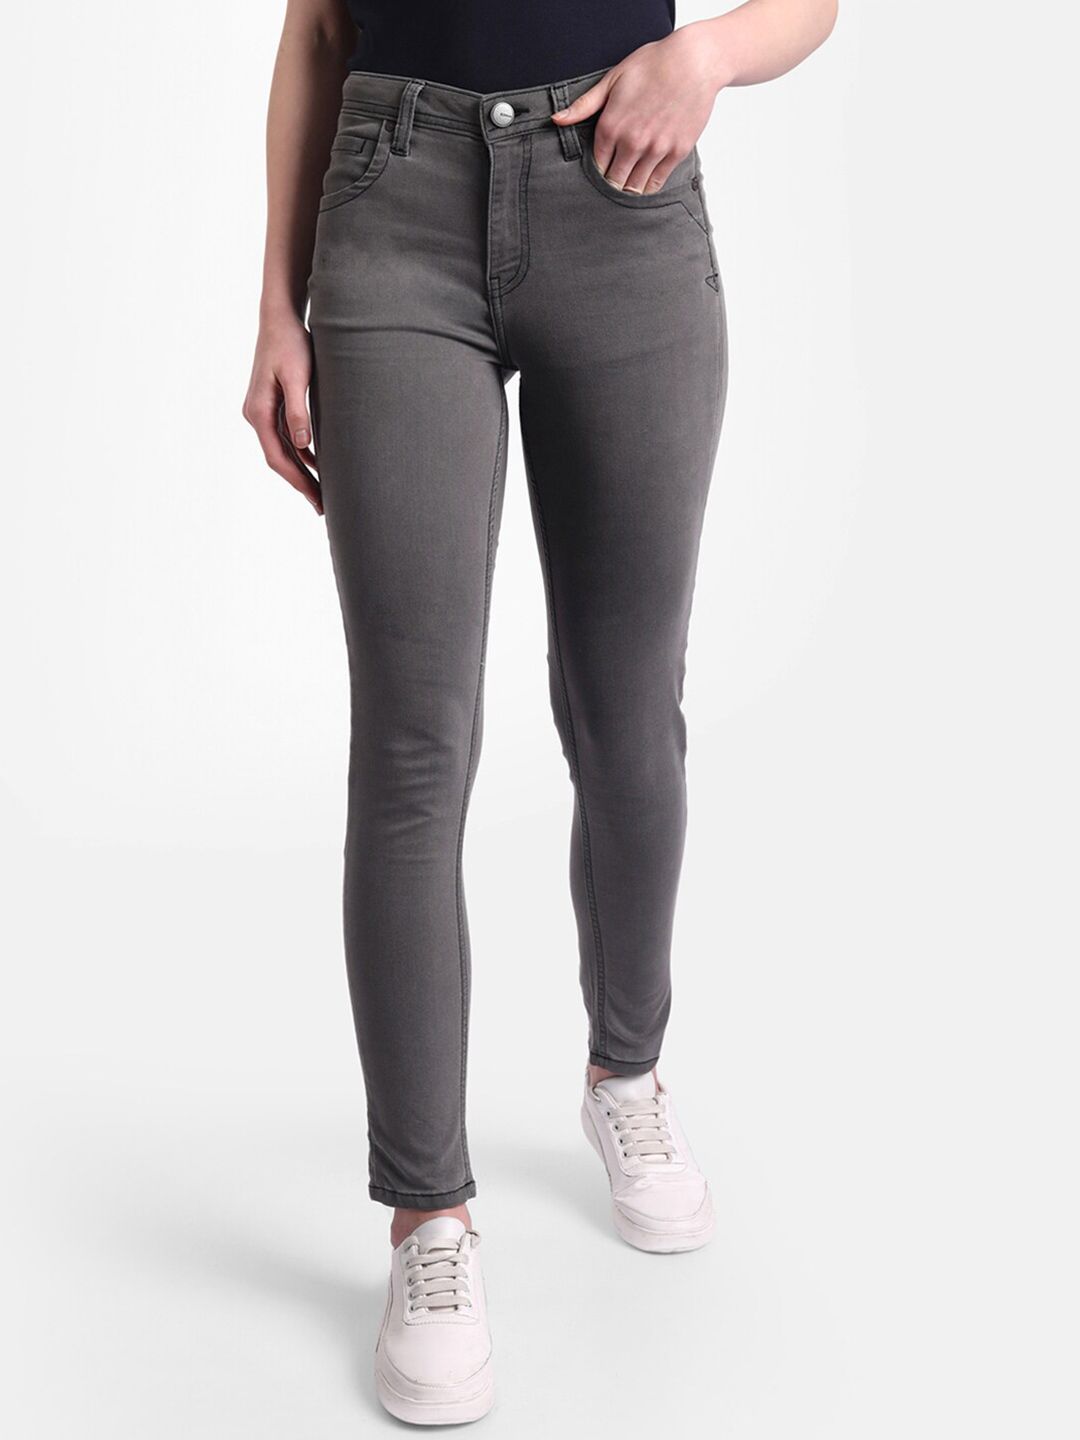 United Colors of Benetton Women Grey Skinny Fit Light Fade Jeans Price in India